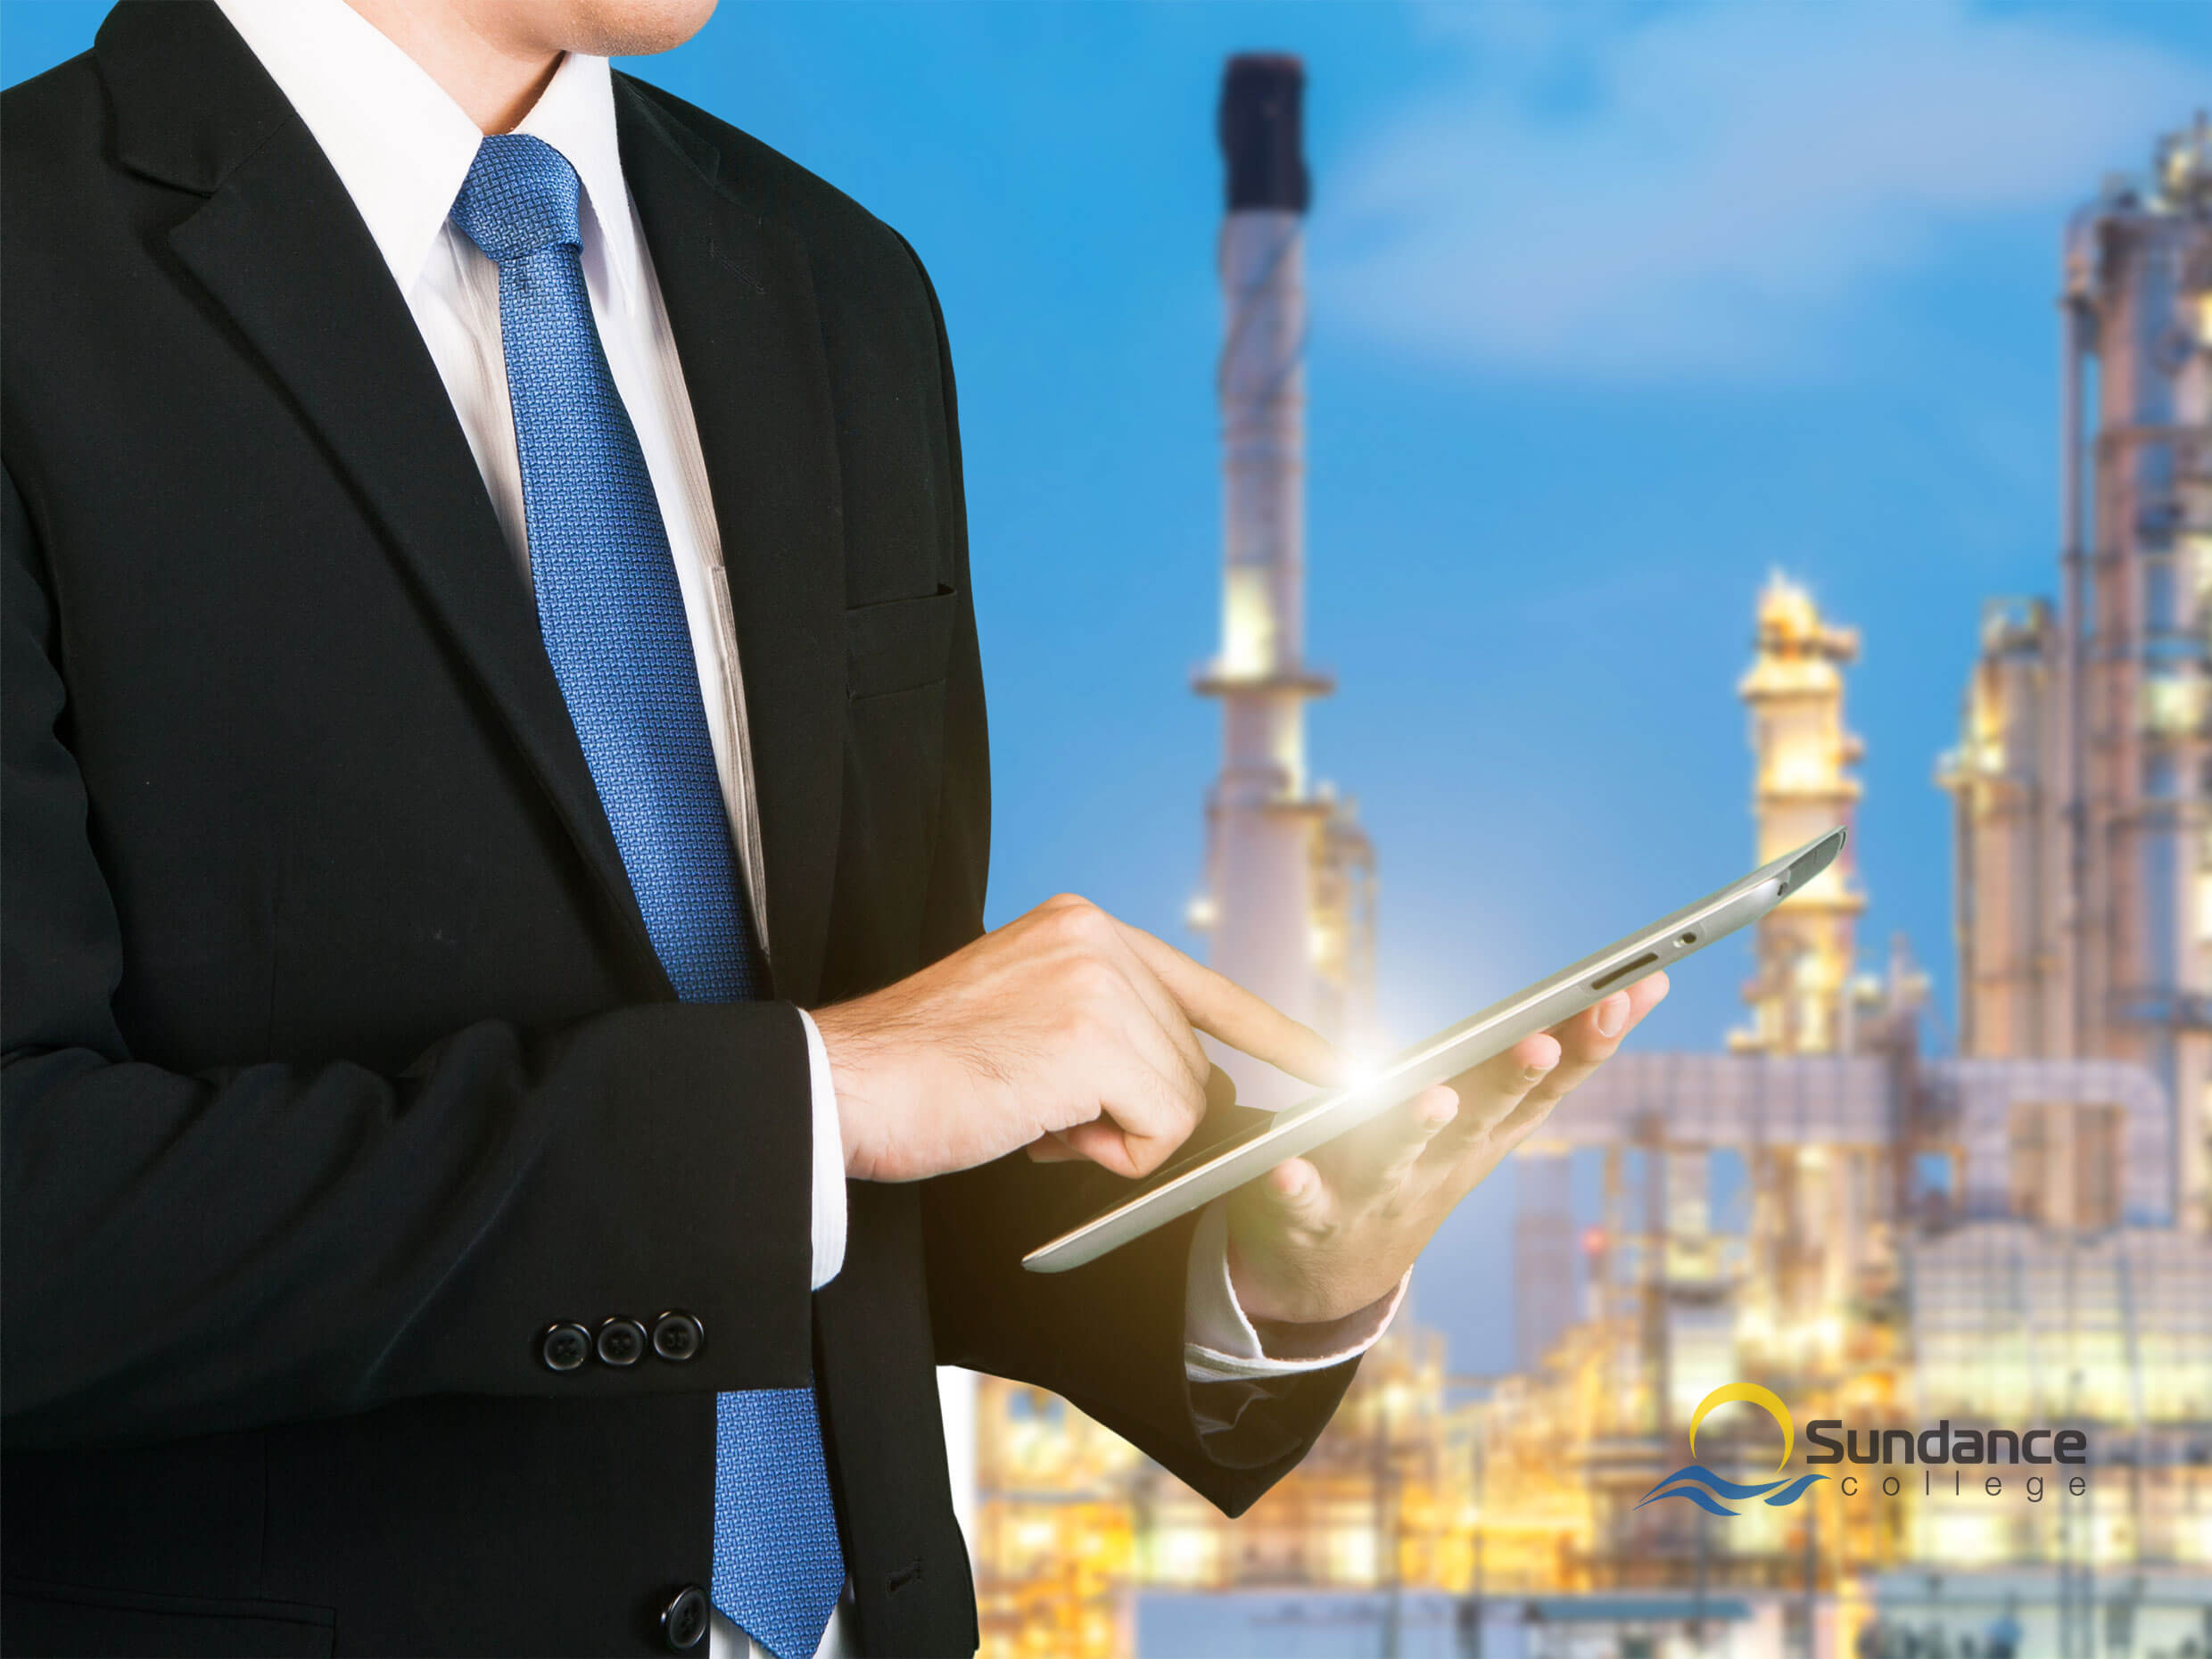 conceptual photo of self-insert administrator for oil and gas company interacting with data on device connected to oil and gas plant